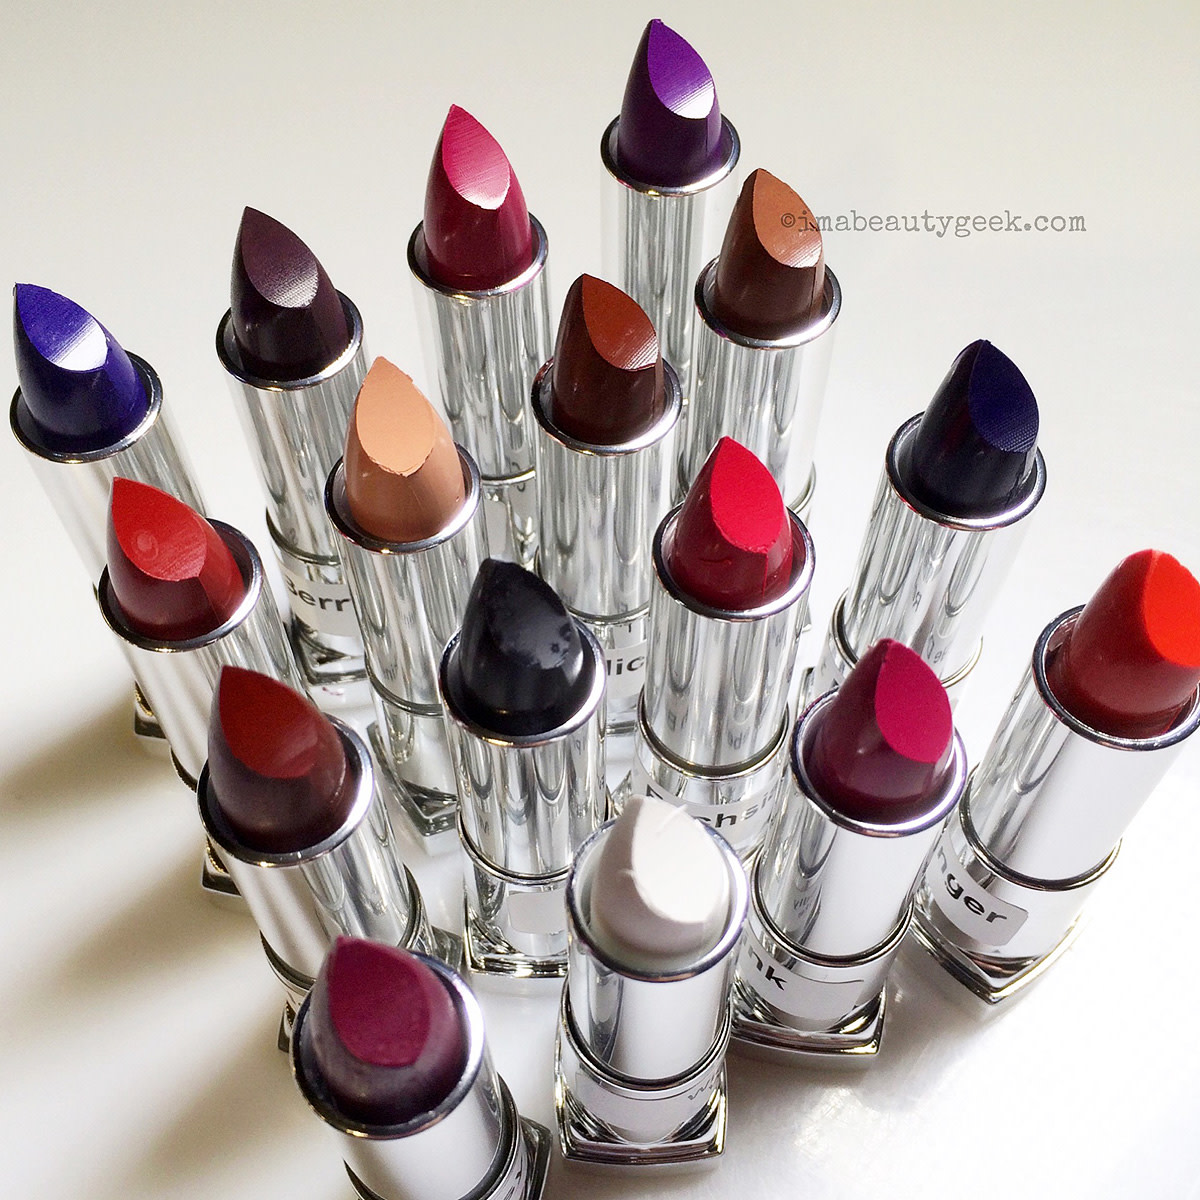 Maybelline New York ColorSensational The Loaded Bolds Lipstick collection: July in Canada.